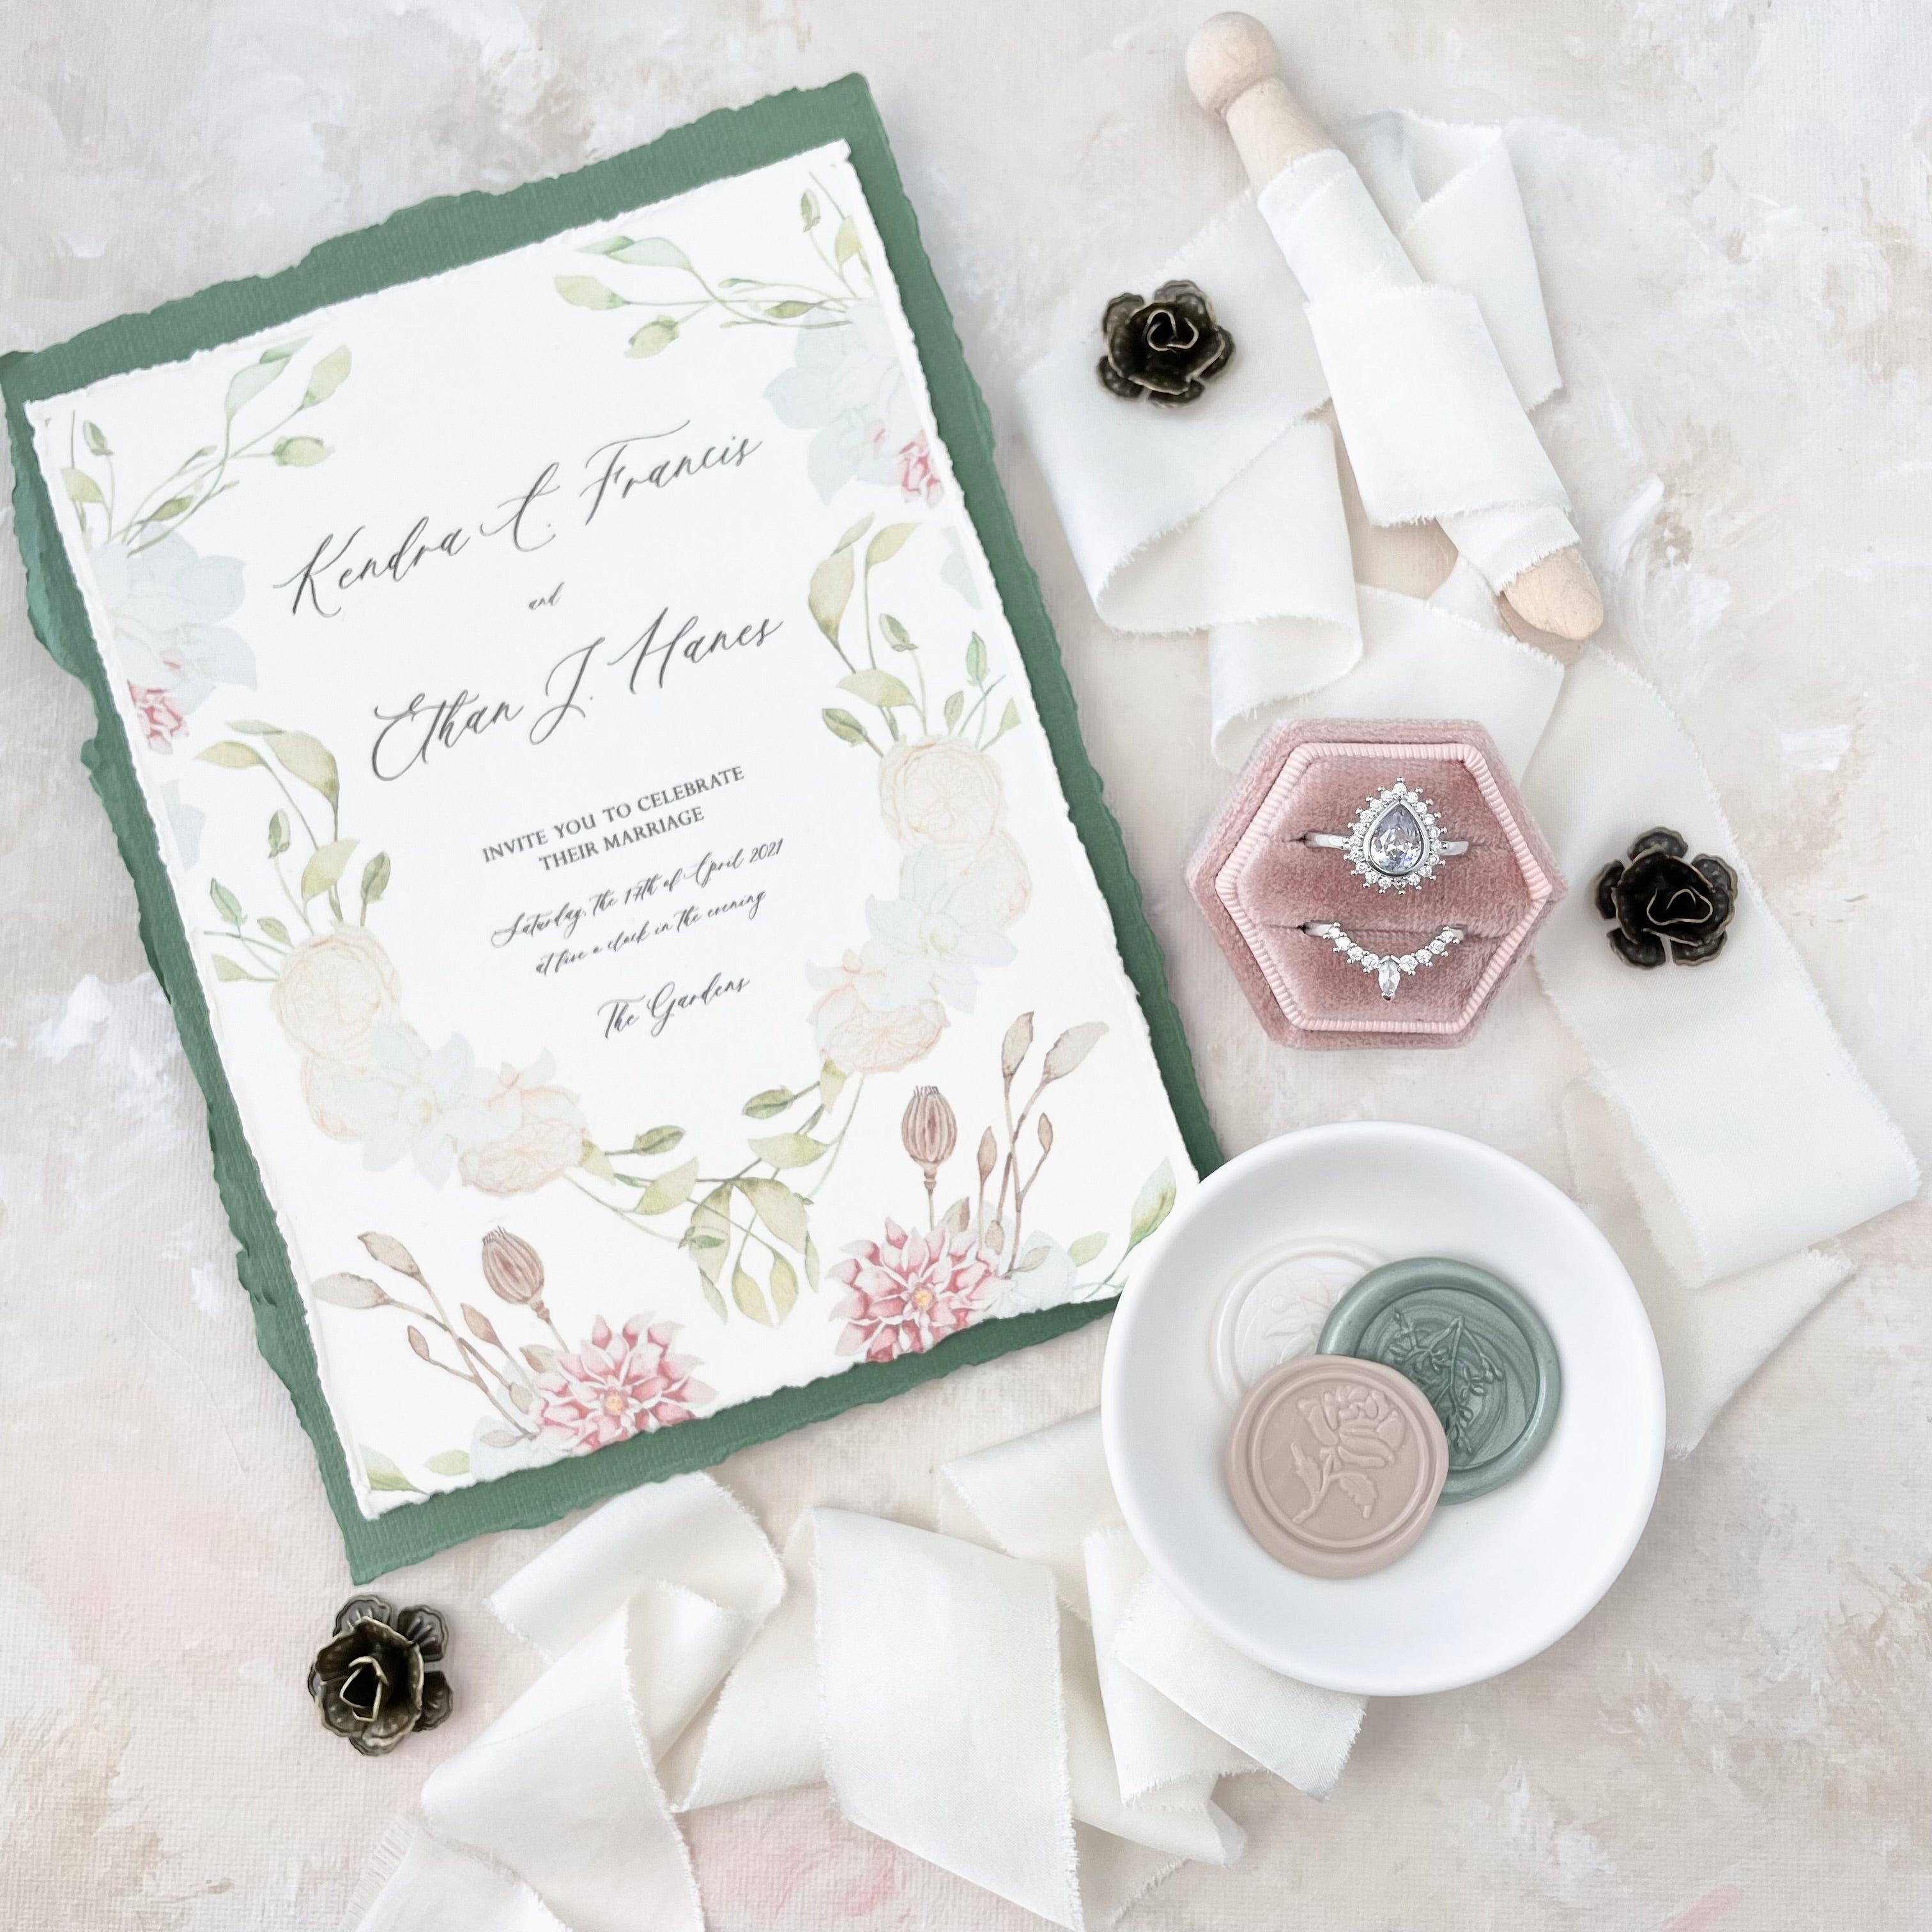 Floral wedding invitation with sage green envelope styled with dusty pink ring box, ivory ribbon, 3 wax seals in white dish and 3 metal styling flowers - flat lay props from Champagne & GRIT